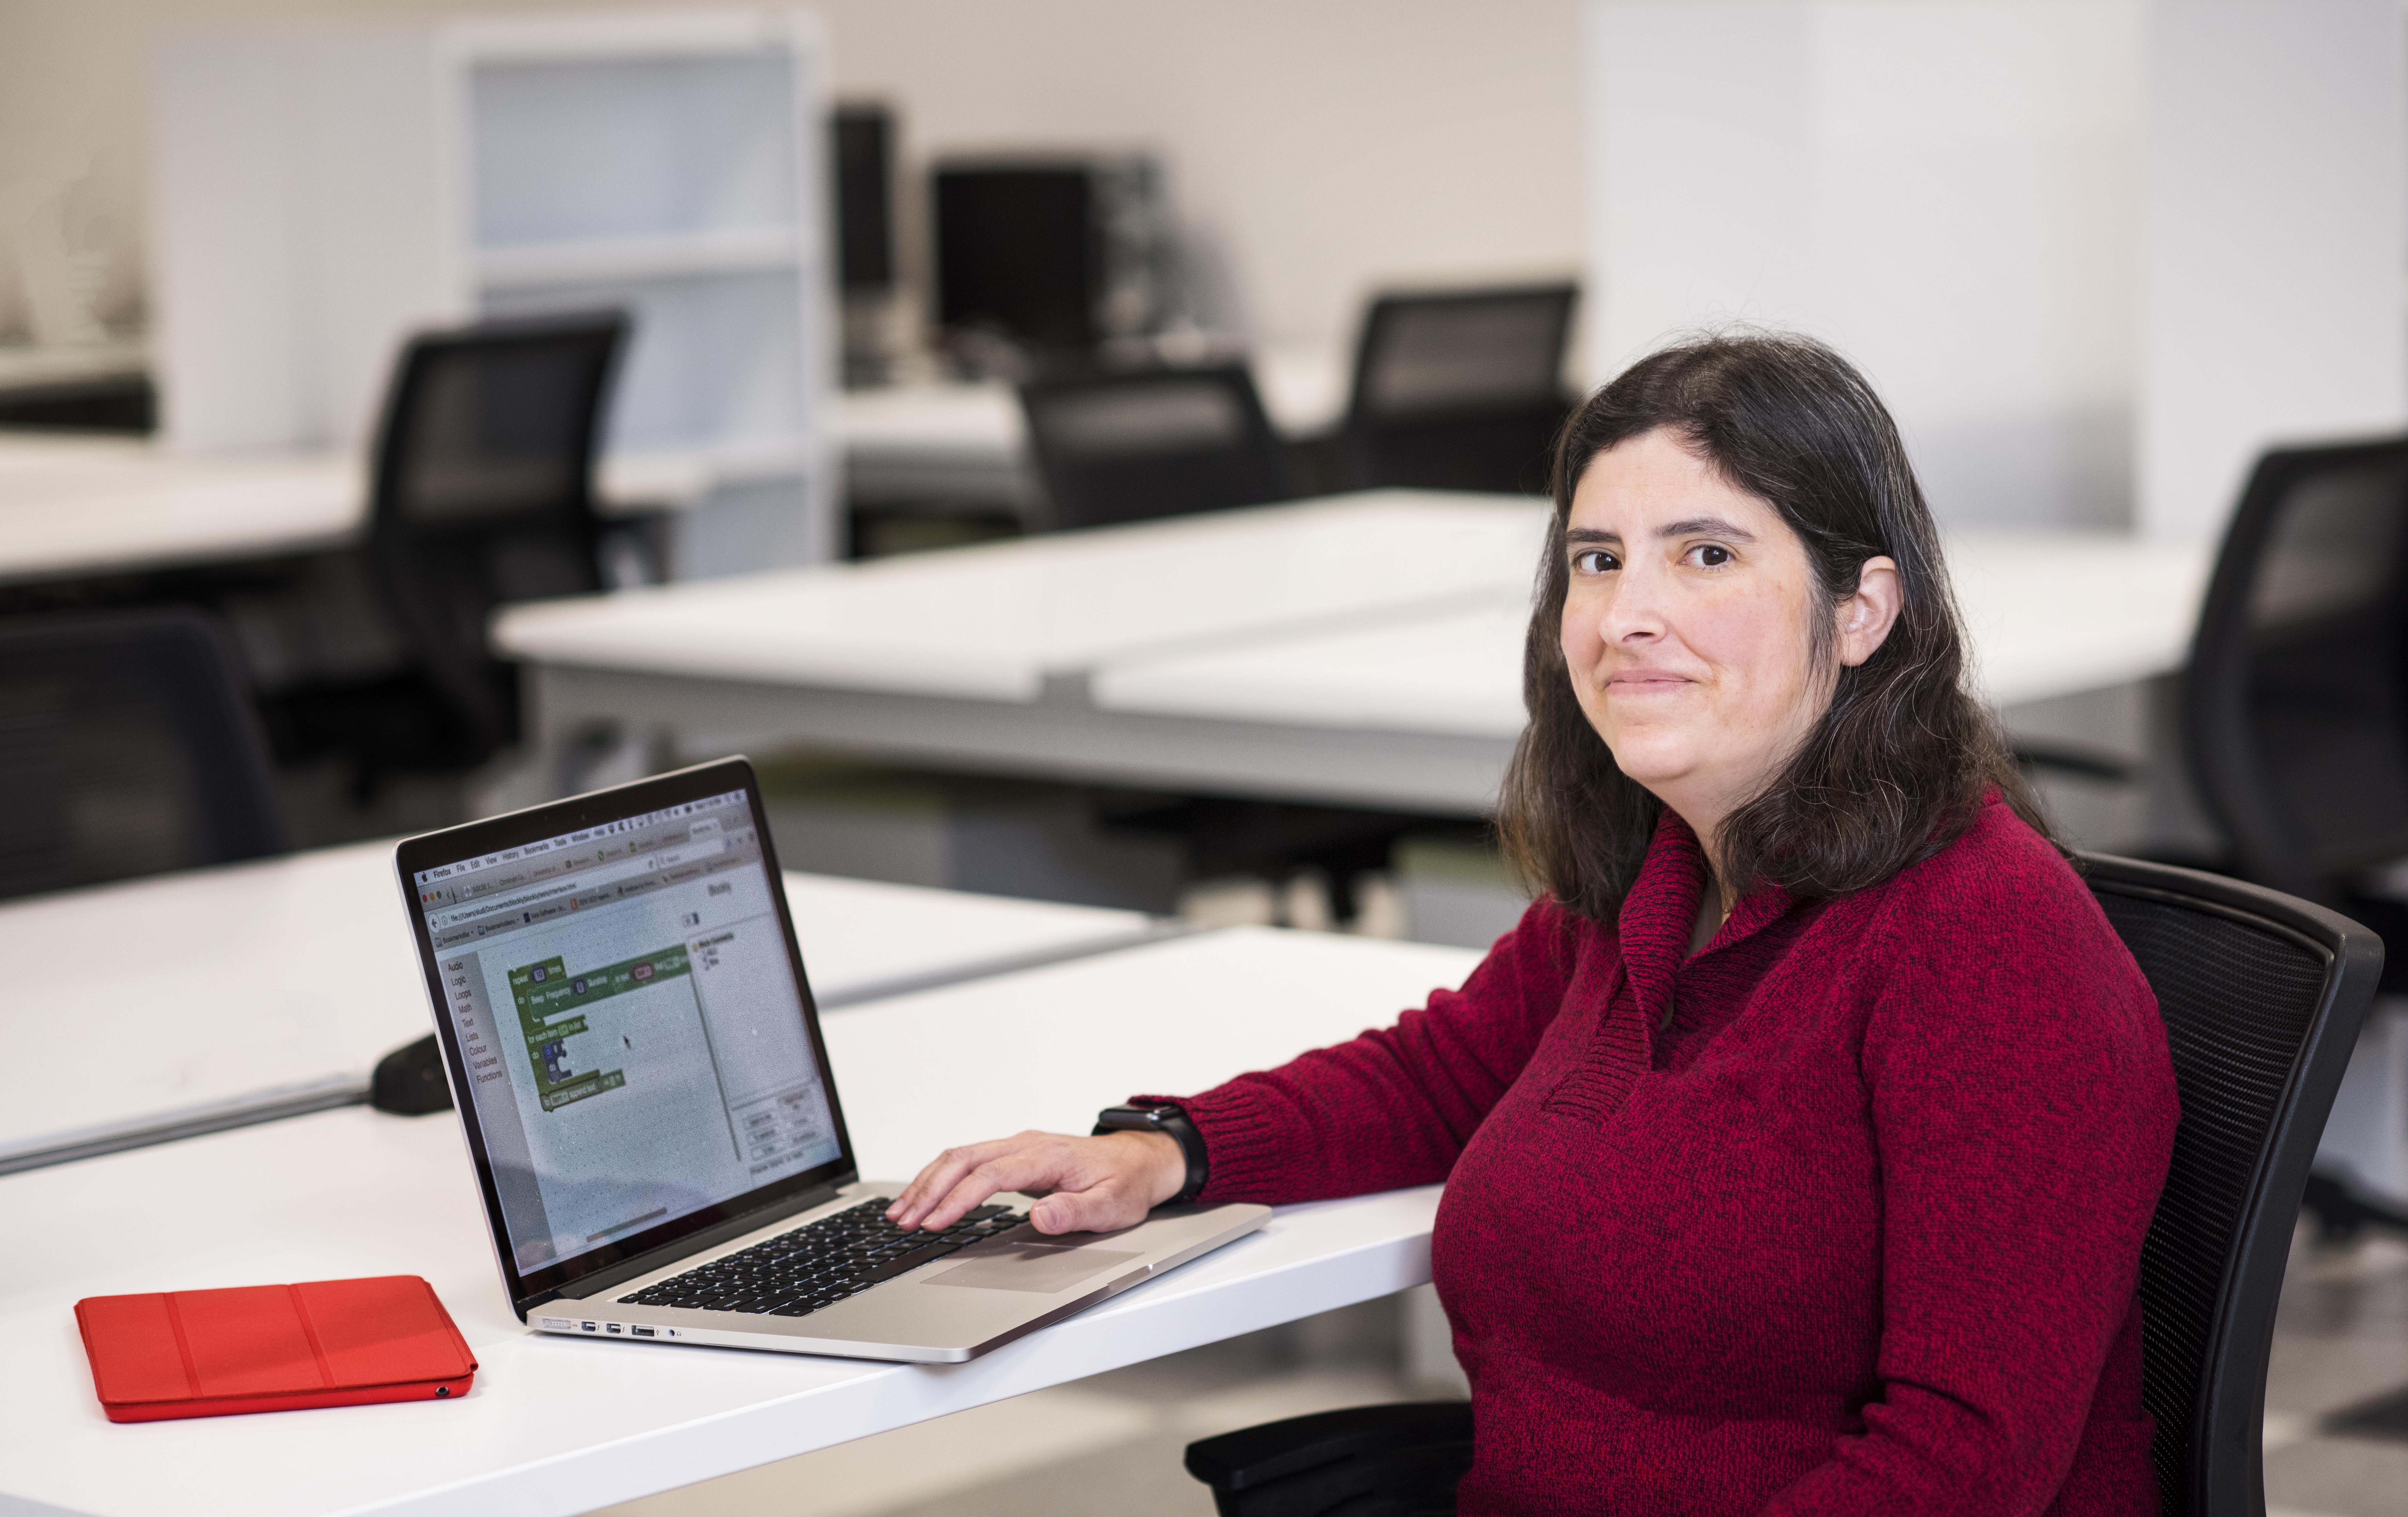 Stephanie Ludi, an engineering professor at the University of North Texas, is helping visually impaired students to learn computer science 